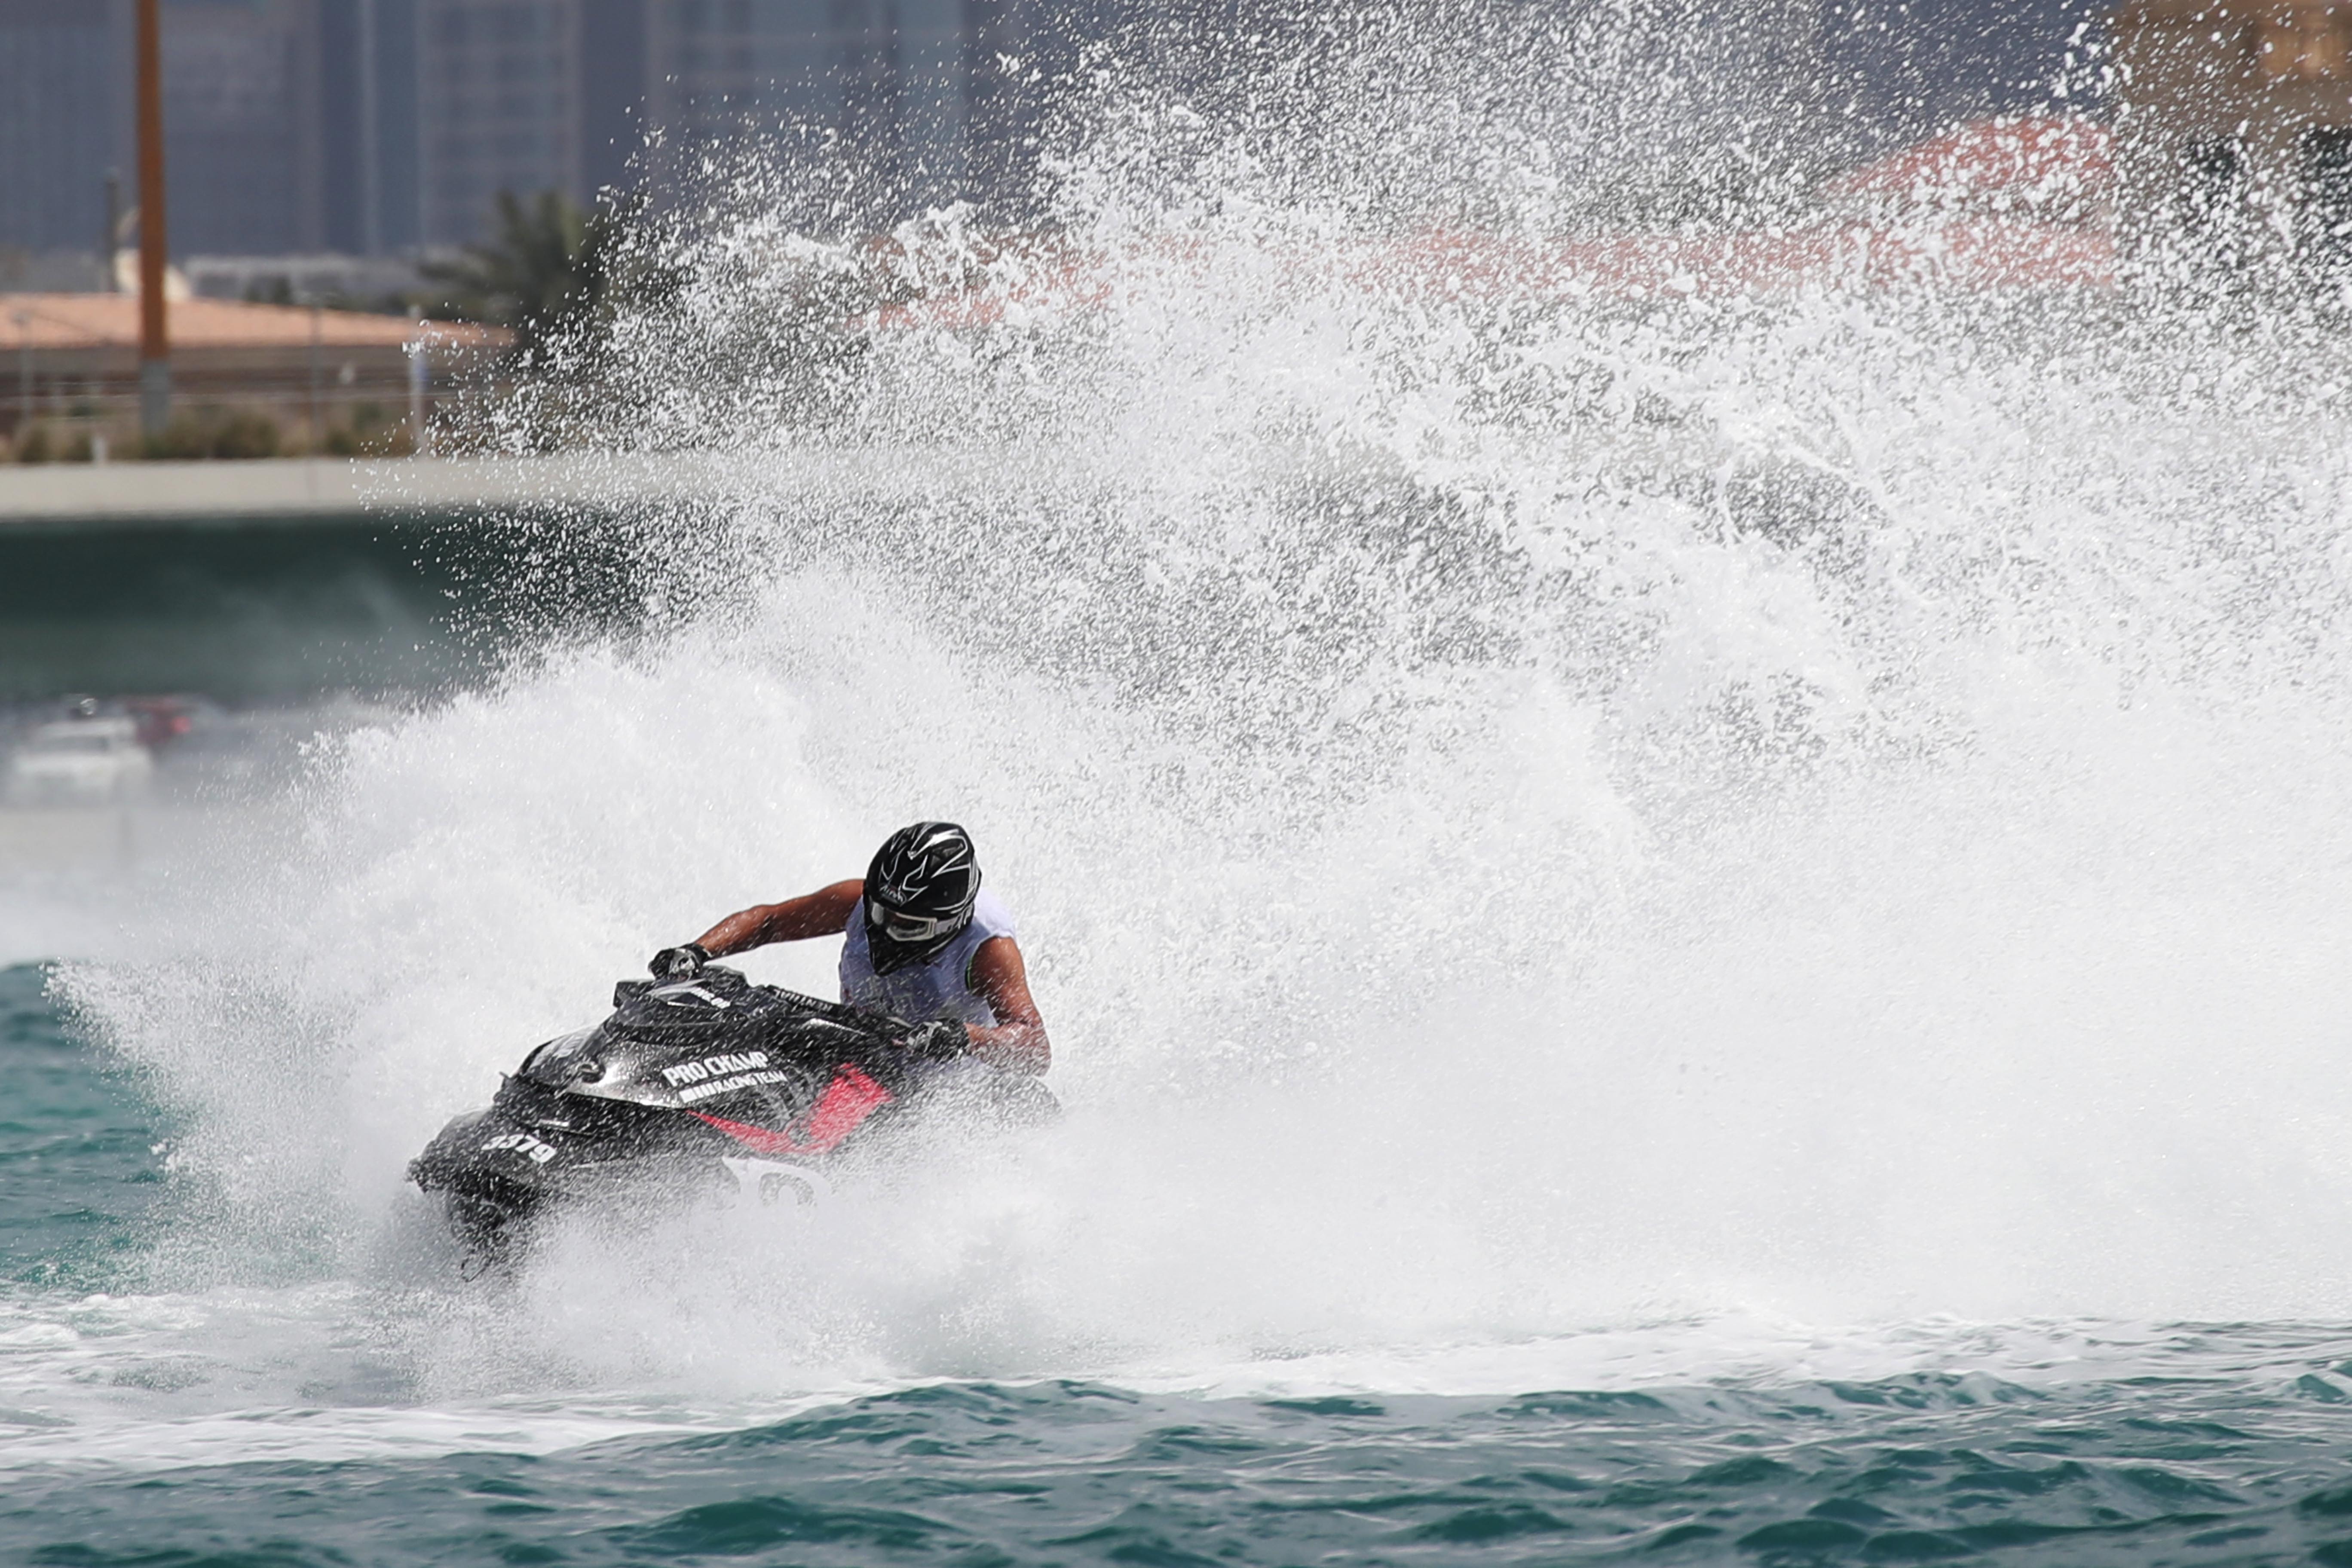 World Champions Competing in Aquabike Race Today